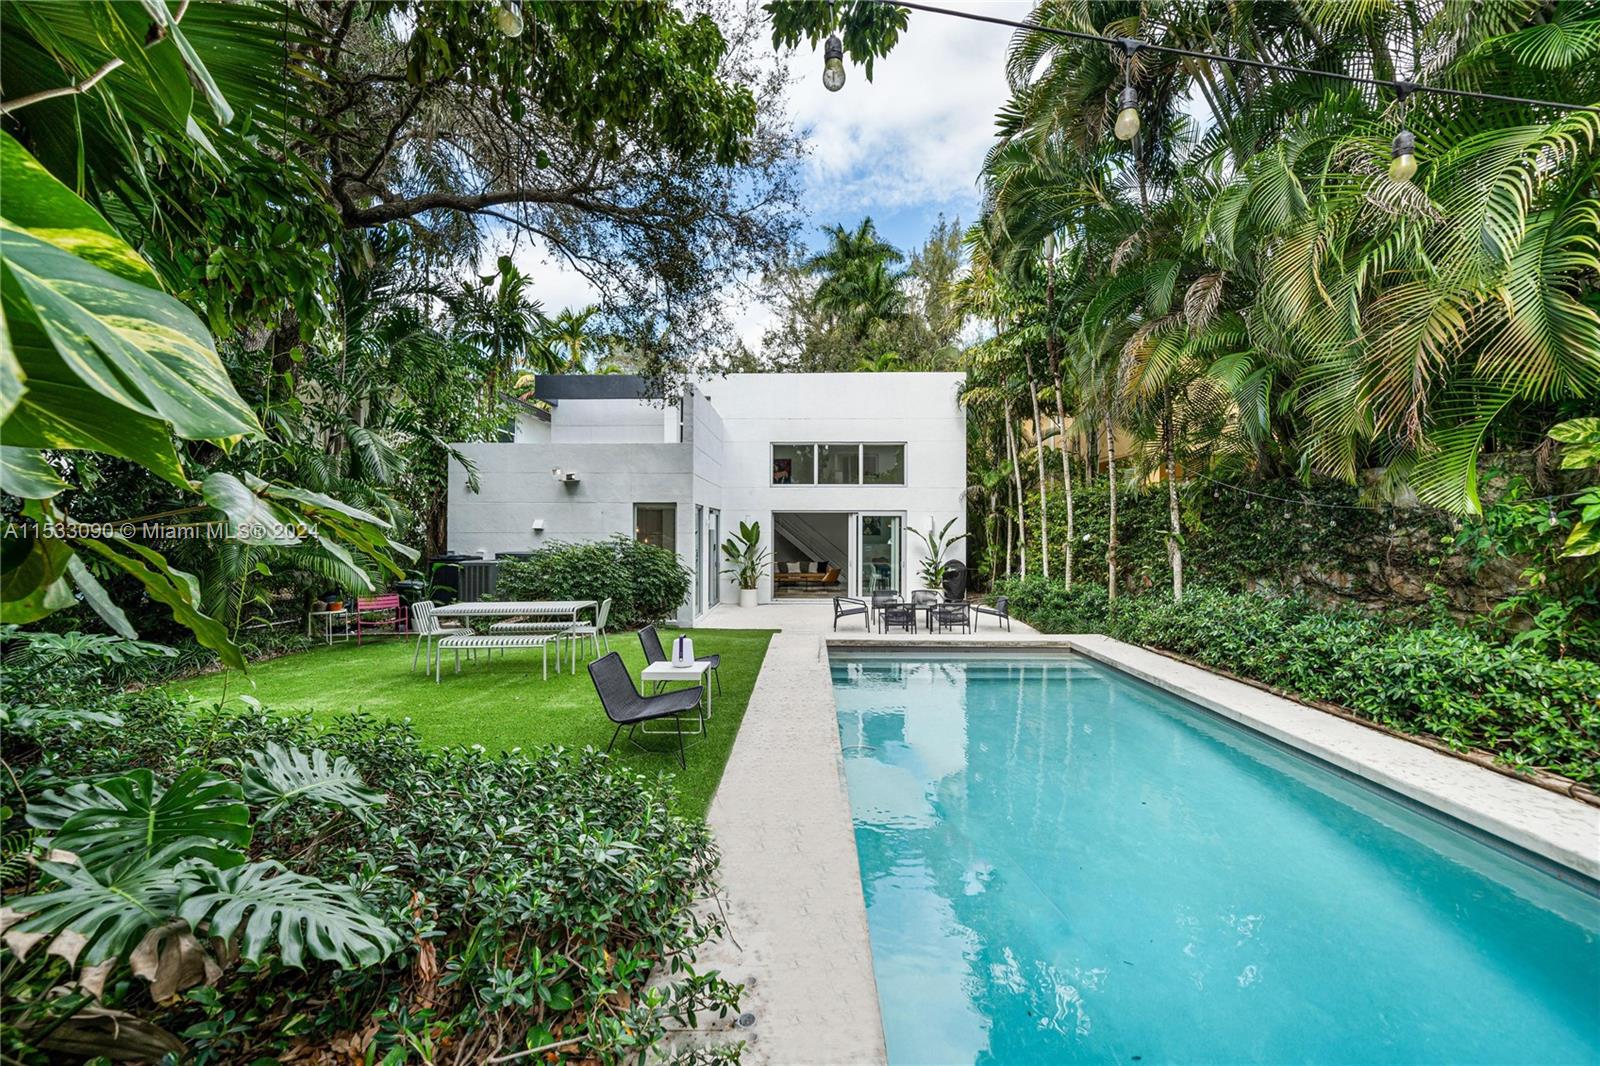 Seize the opportunity to reside in the sought-after South Coconut Grove! Designed by the awarded architect Roney Mateu, this home stands as a contemporary design masterpiece, featuring chic and minimalist aesthetics. The residence is bathed in light, offering expansive views of lush vegetation. Its layout ensures tranquility and privacy. The house offers 3 bedrooms,3 bathrooms, a family room, an office easily convertible to a bedroom, and a two-car garage. High ceilings and generous interiors, together with the meticulously maintained grounds and a pool, establish this jewel as a haven of luxury and style. Situated just a short distance from the Village, with its boutiques, restaurants, and some of the best schools. Only minutes away from marinas, MIA airport, Brickell, and the beaches.